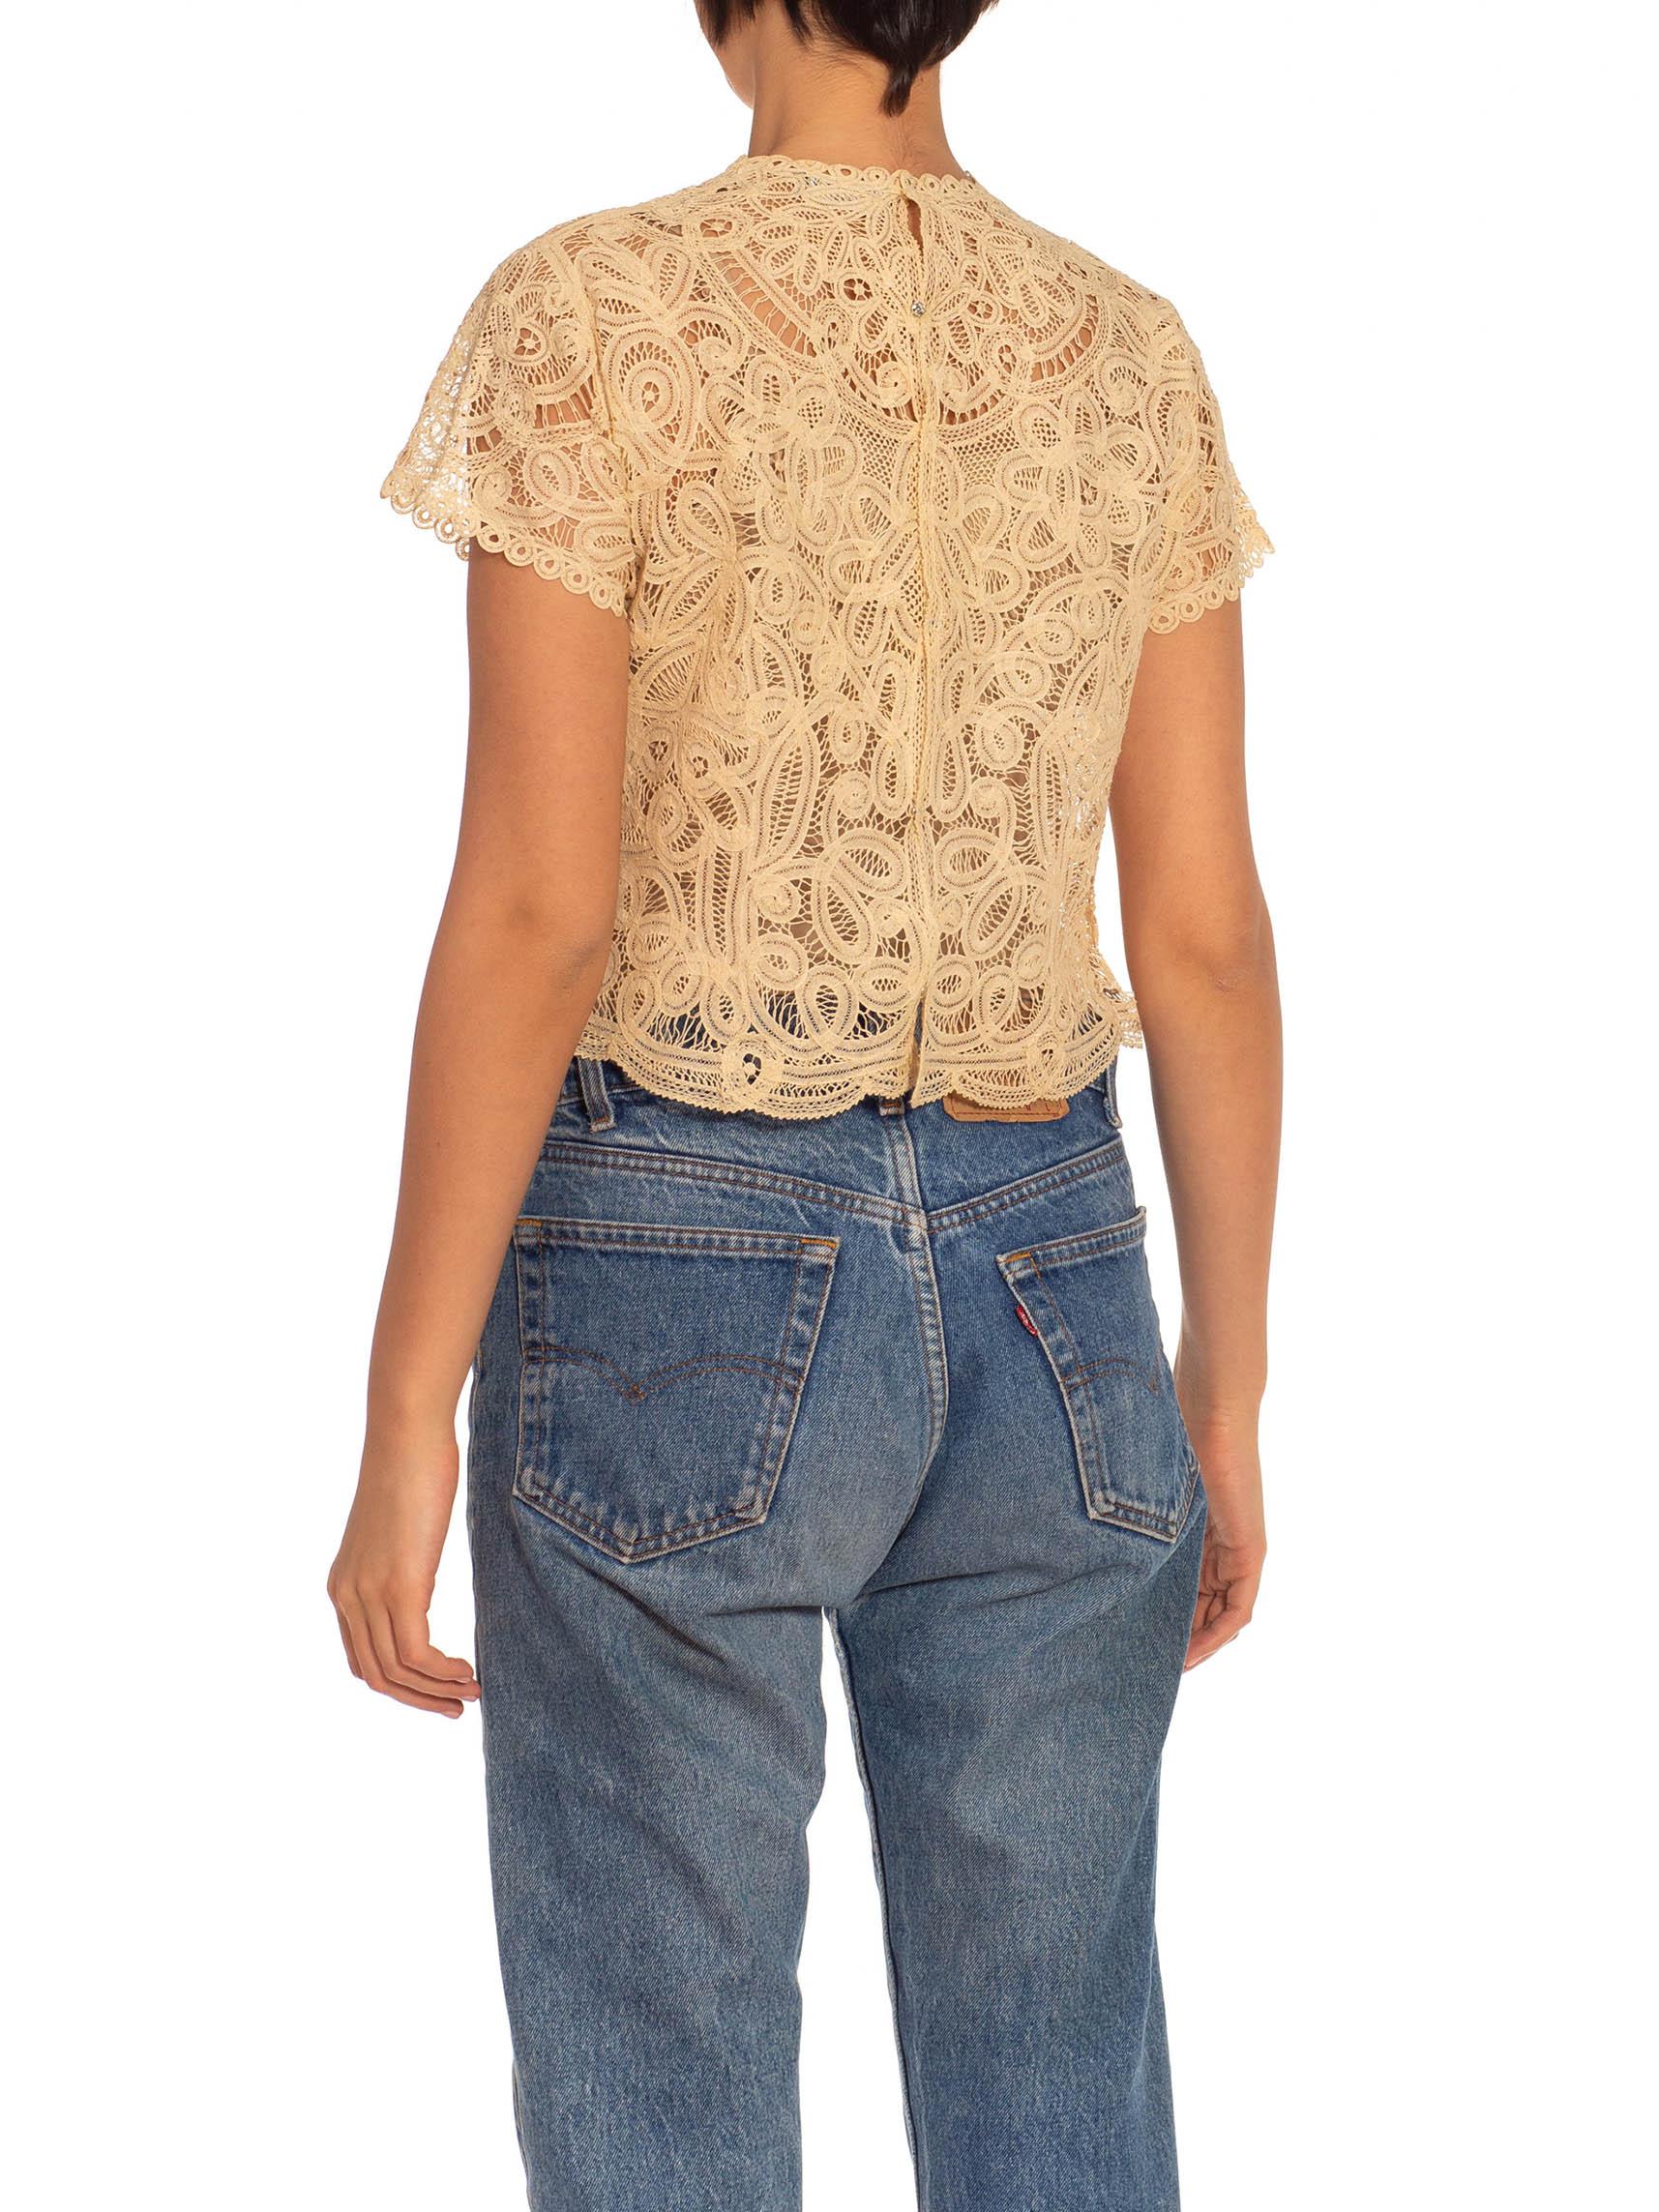 Victorian Cream Battenberg Lace Top In Excellent Condition For Sale In New York, NY